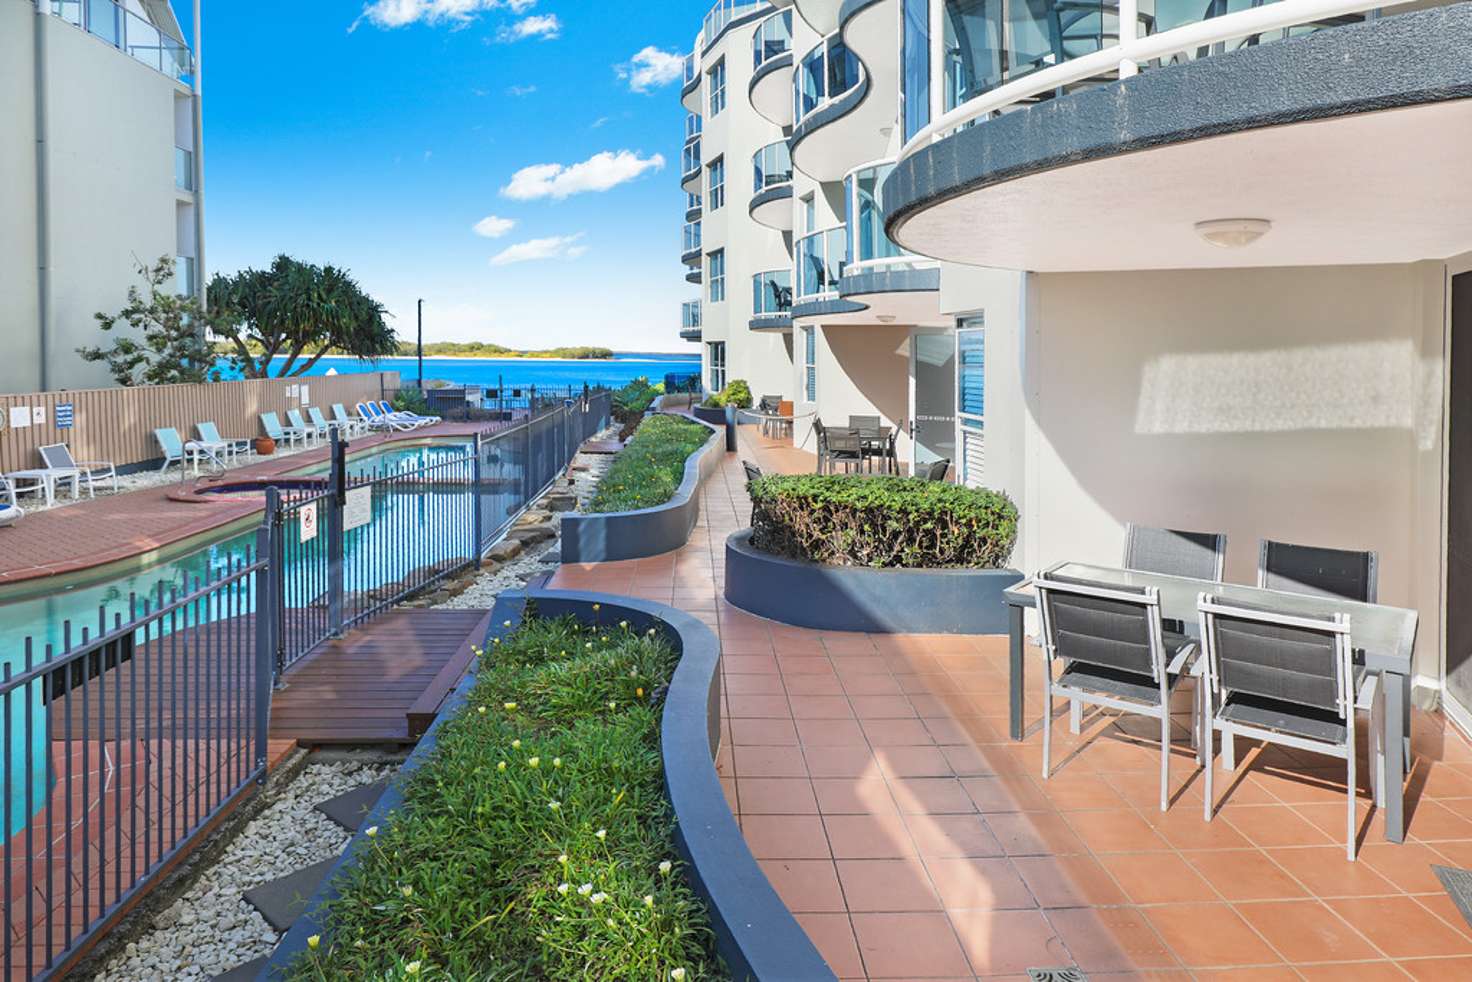 Main view of Homely unit listing, 5/38 Maloja Ave 'Watermark Apartments', Caloundra QLD 4551